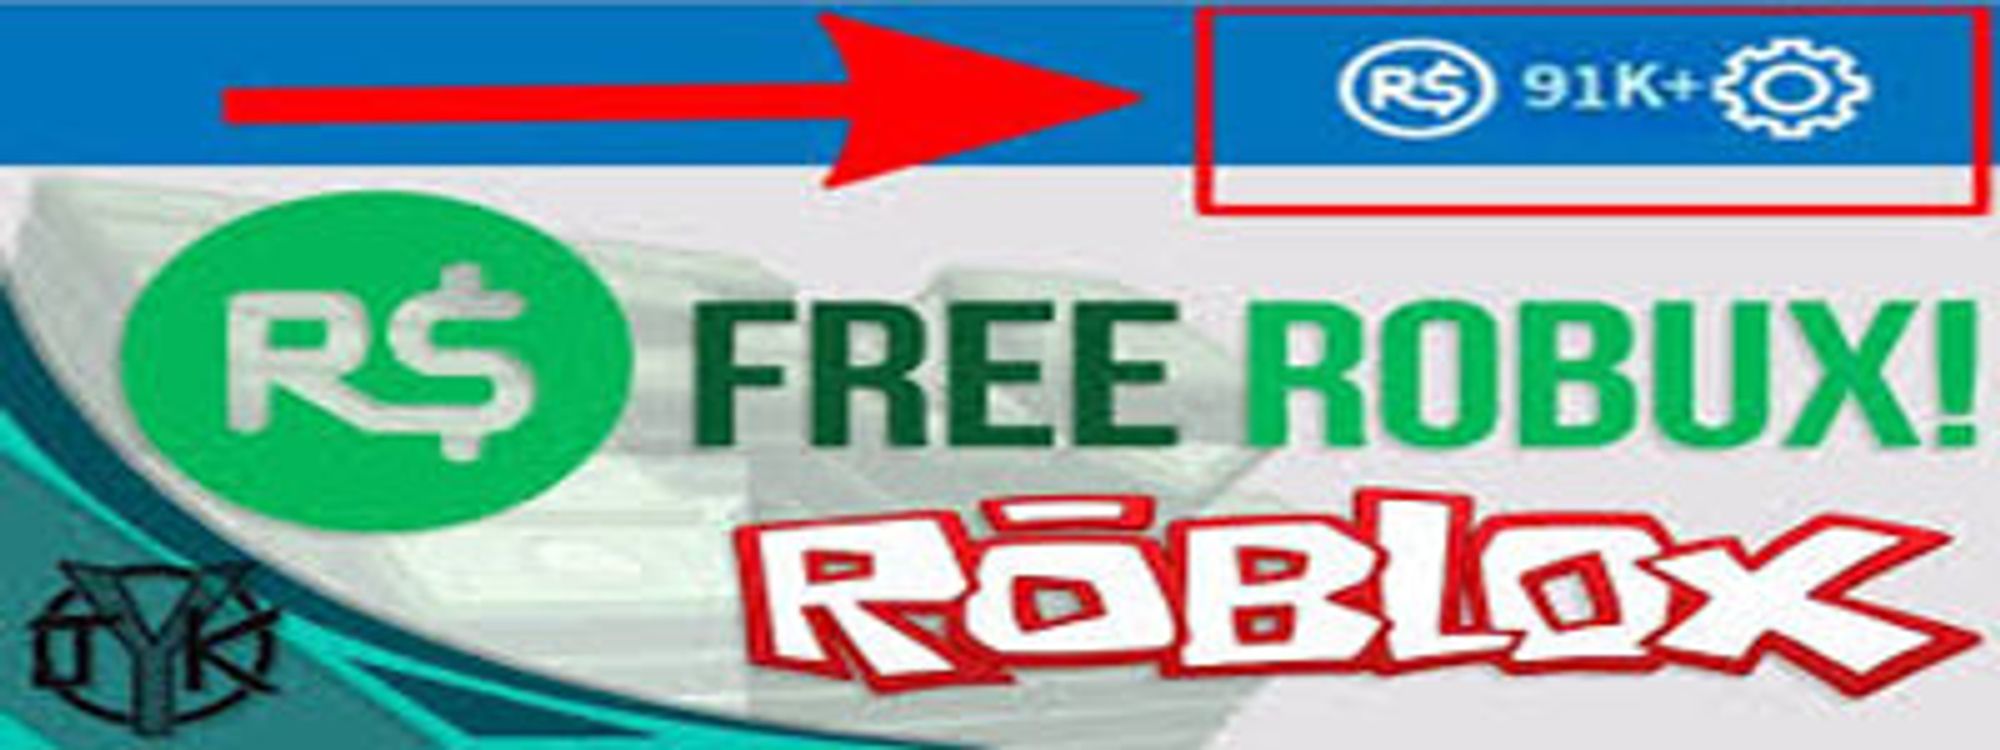 Roblox Robux Free Roblox Robux Codes With Skins Password Account 2020 - roblox robux codes 2020 i got 35k with this free robux generator in 2020 roblox codes roblox roblox gifts